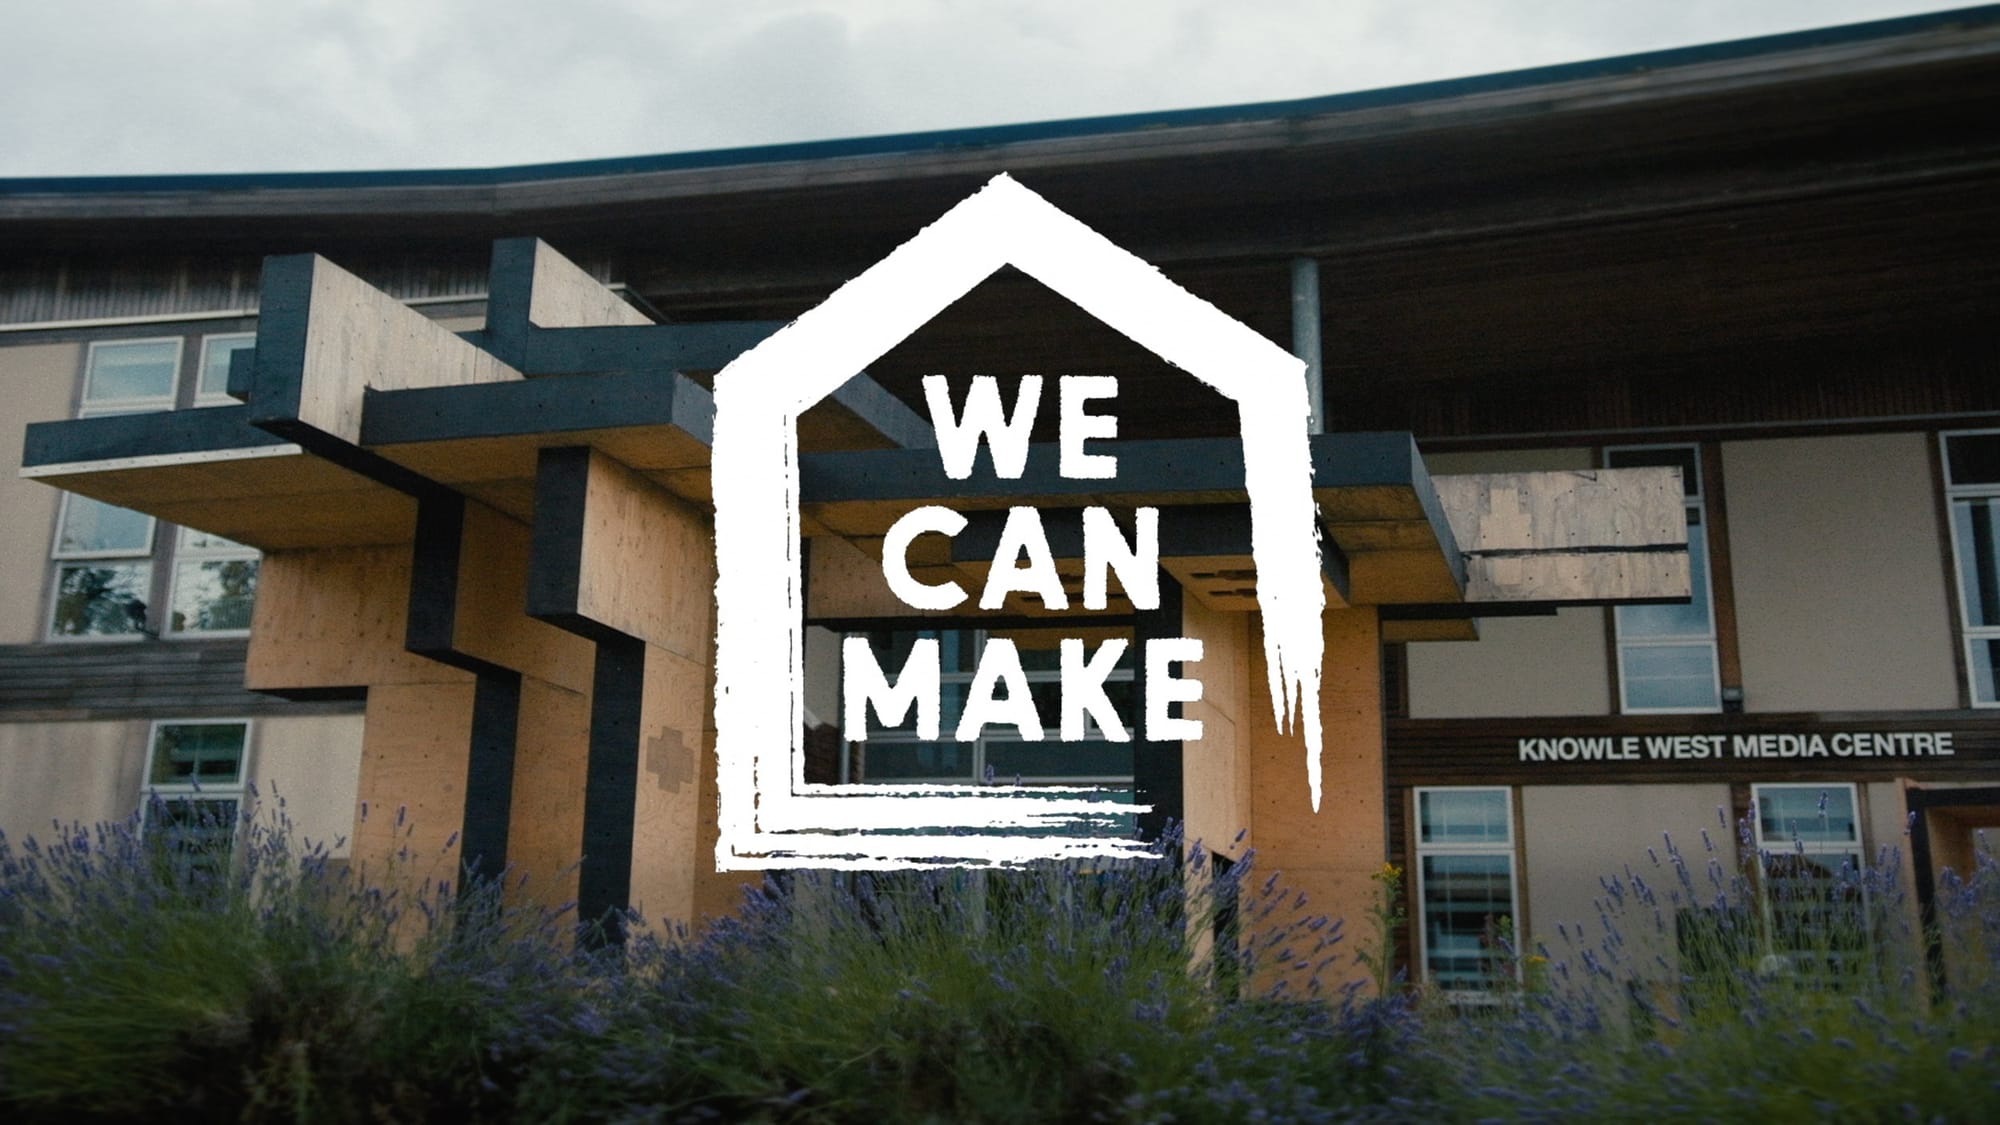 MMMM! on Monday 5 Feb: Four inspirational housing-related films